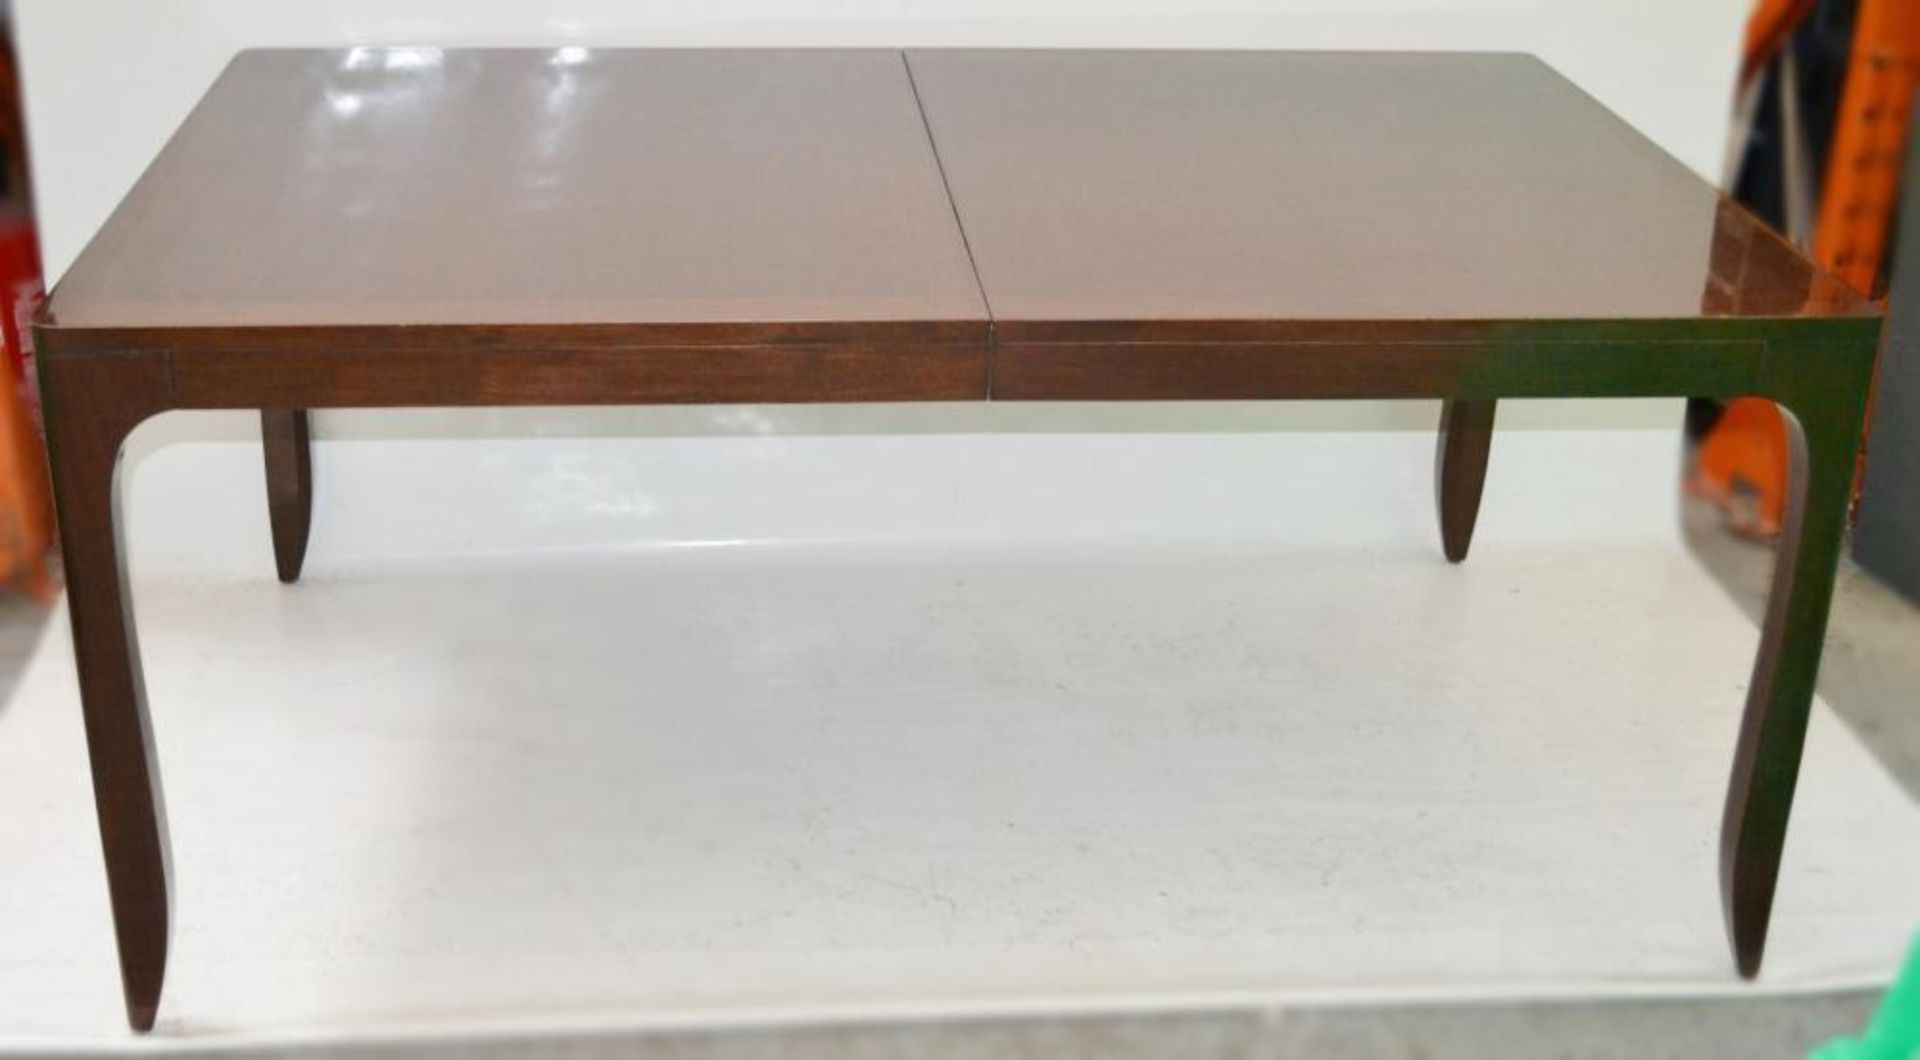 1 x BARBARA BARRY "Perfect Parsons" Dining Table In Dark Walnut - Includes Extensions Leaves - 2.8 M - Image 2 of 17